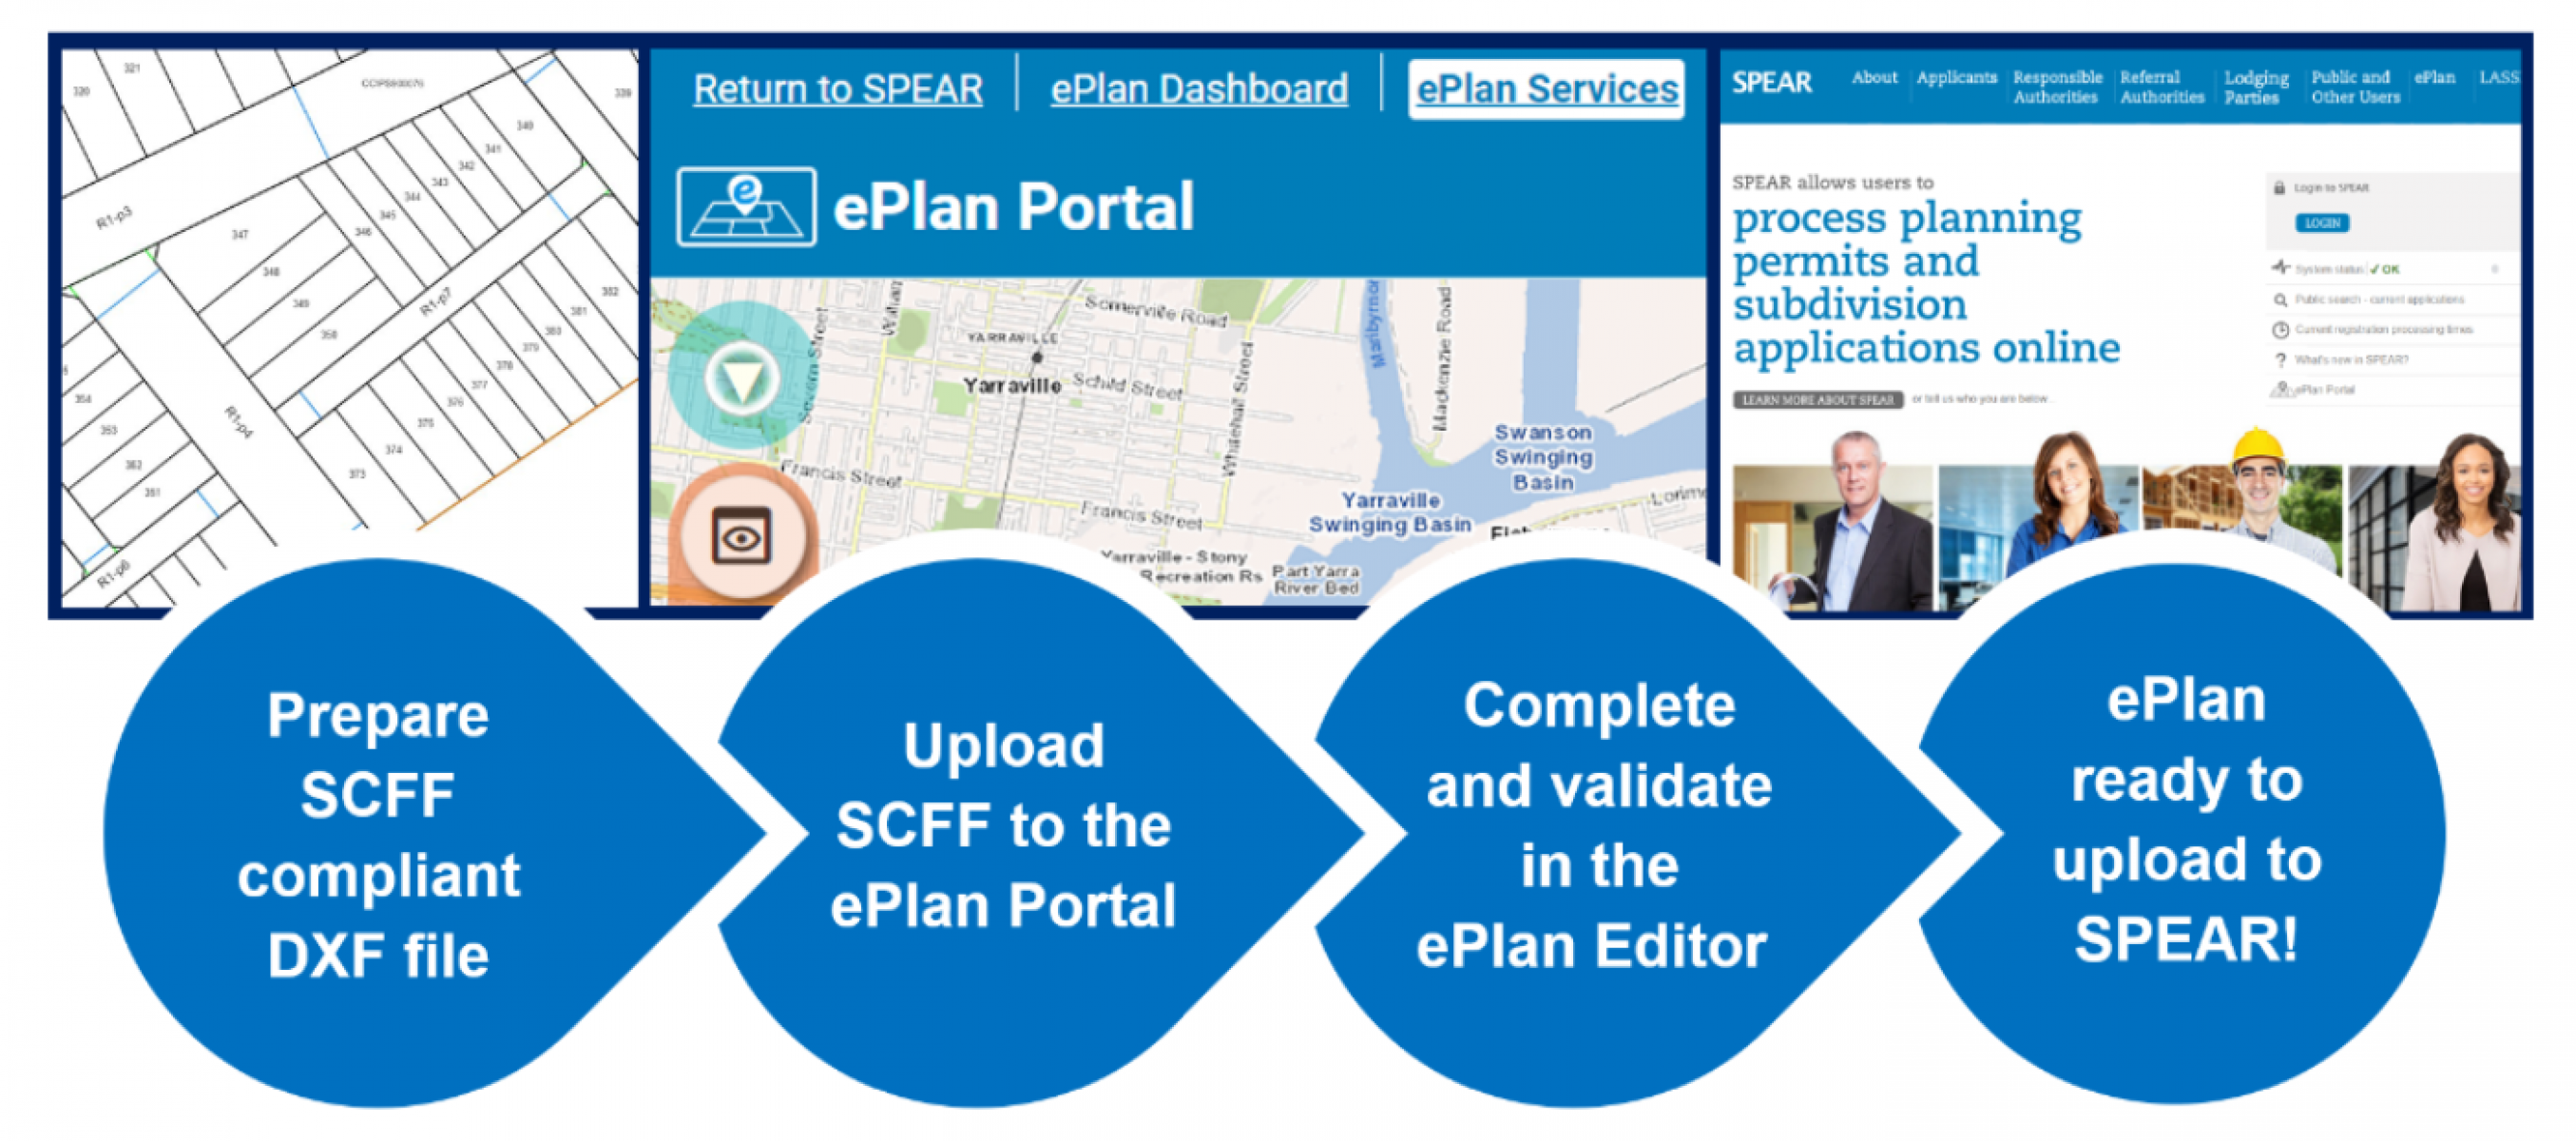 Sample images from the ePlan Portal and SPEAR website as well as the text 'Prepare SCFF compliant DXF file, upload SCFF to the ePlan Portal, complete and validate in the ePlan editor, ePlan ready to upload to SPEAR!'